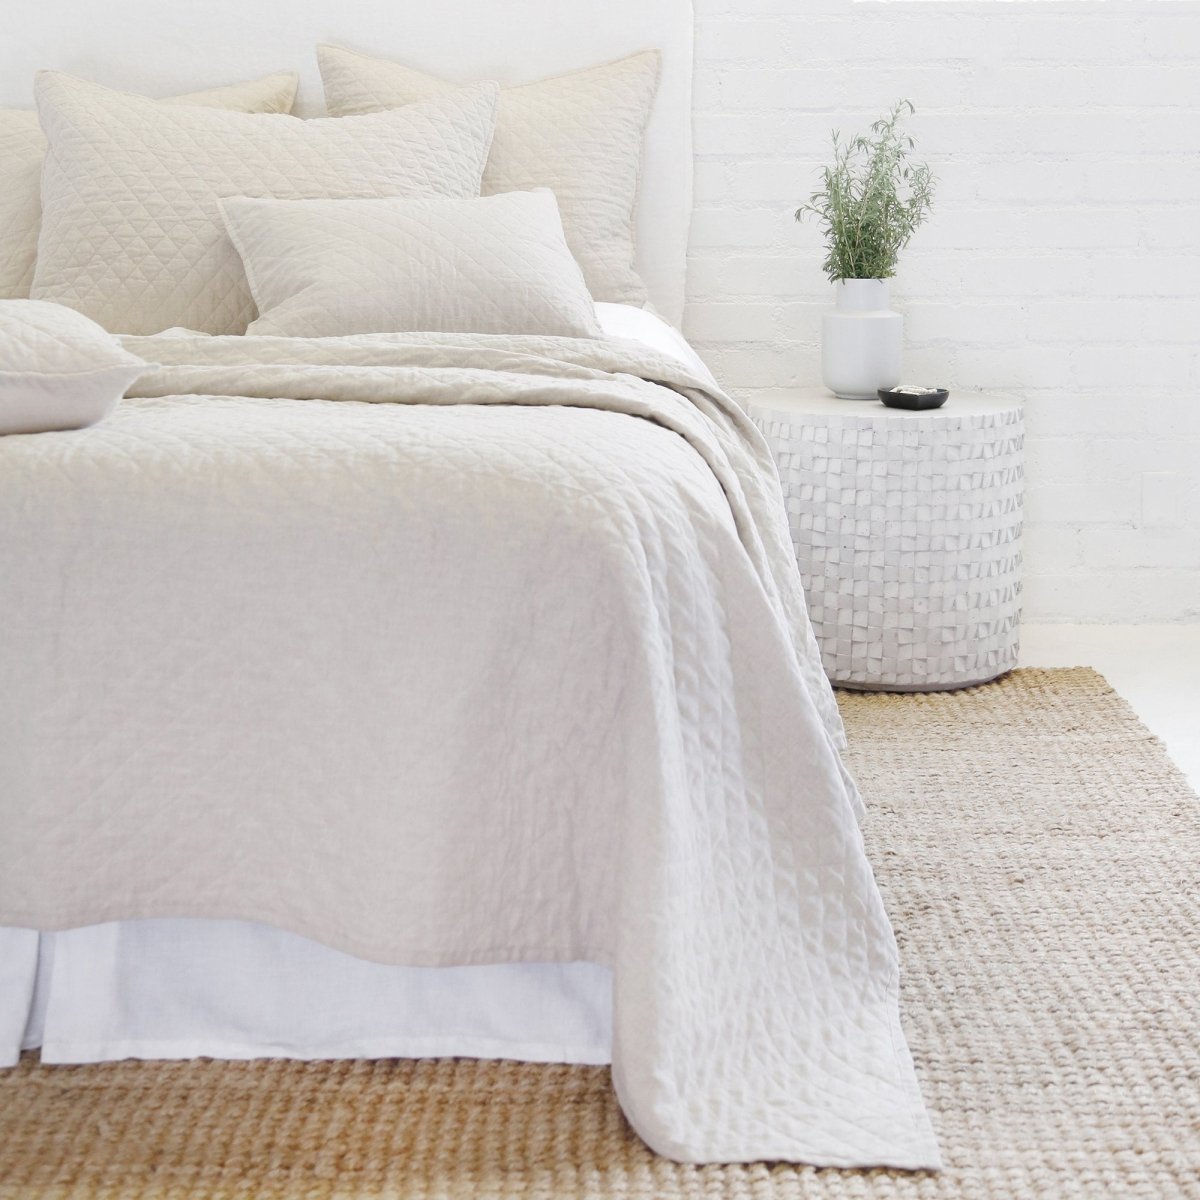 Pom Pom at Home - Hampton Big Pillow in Flax | Fig Linens